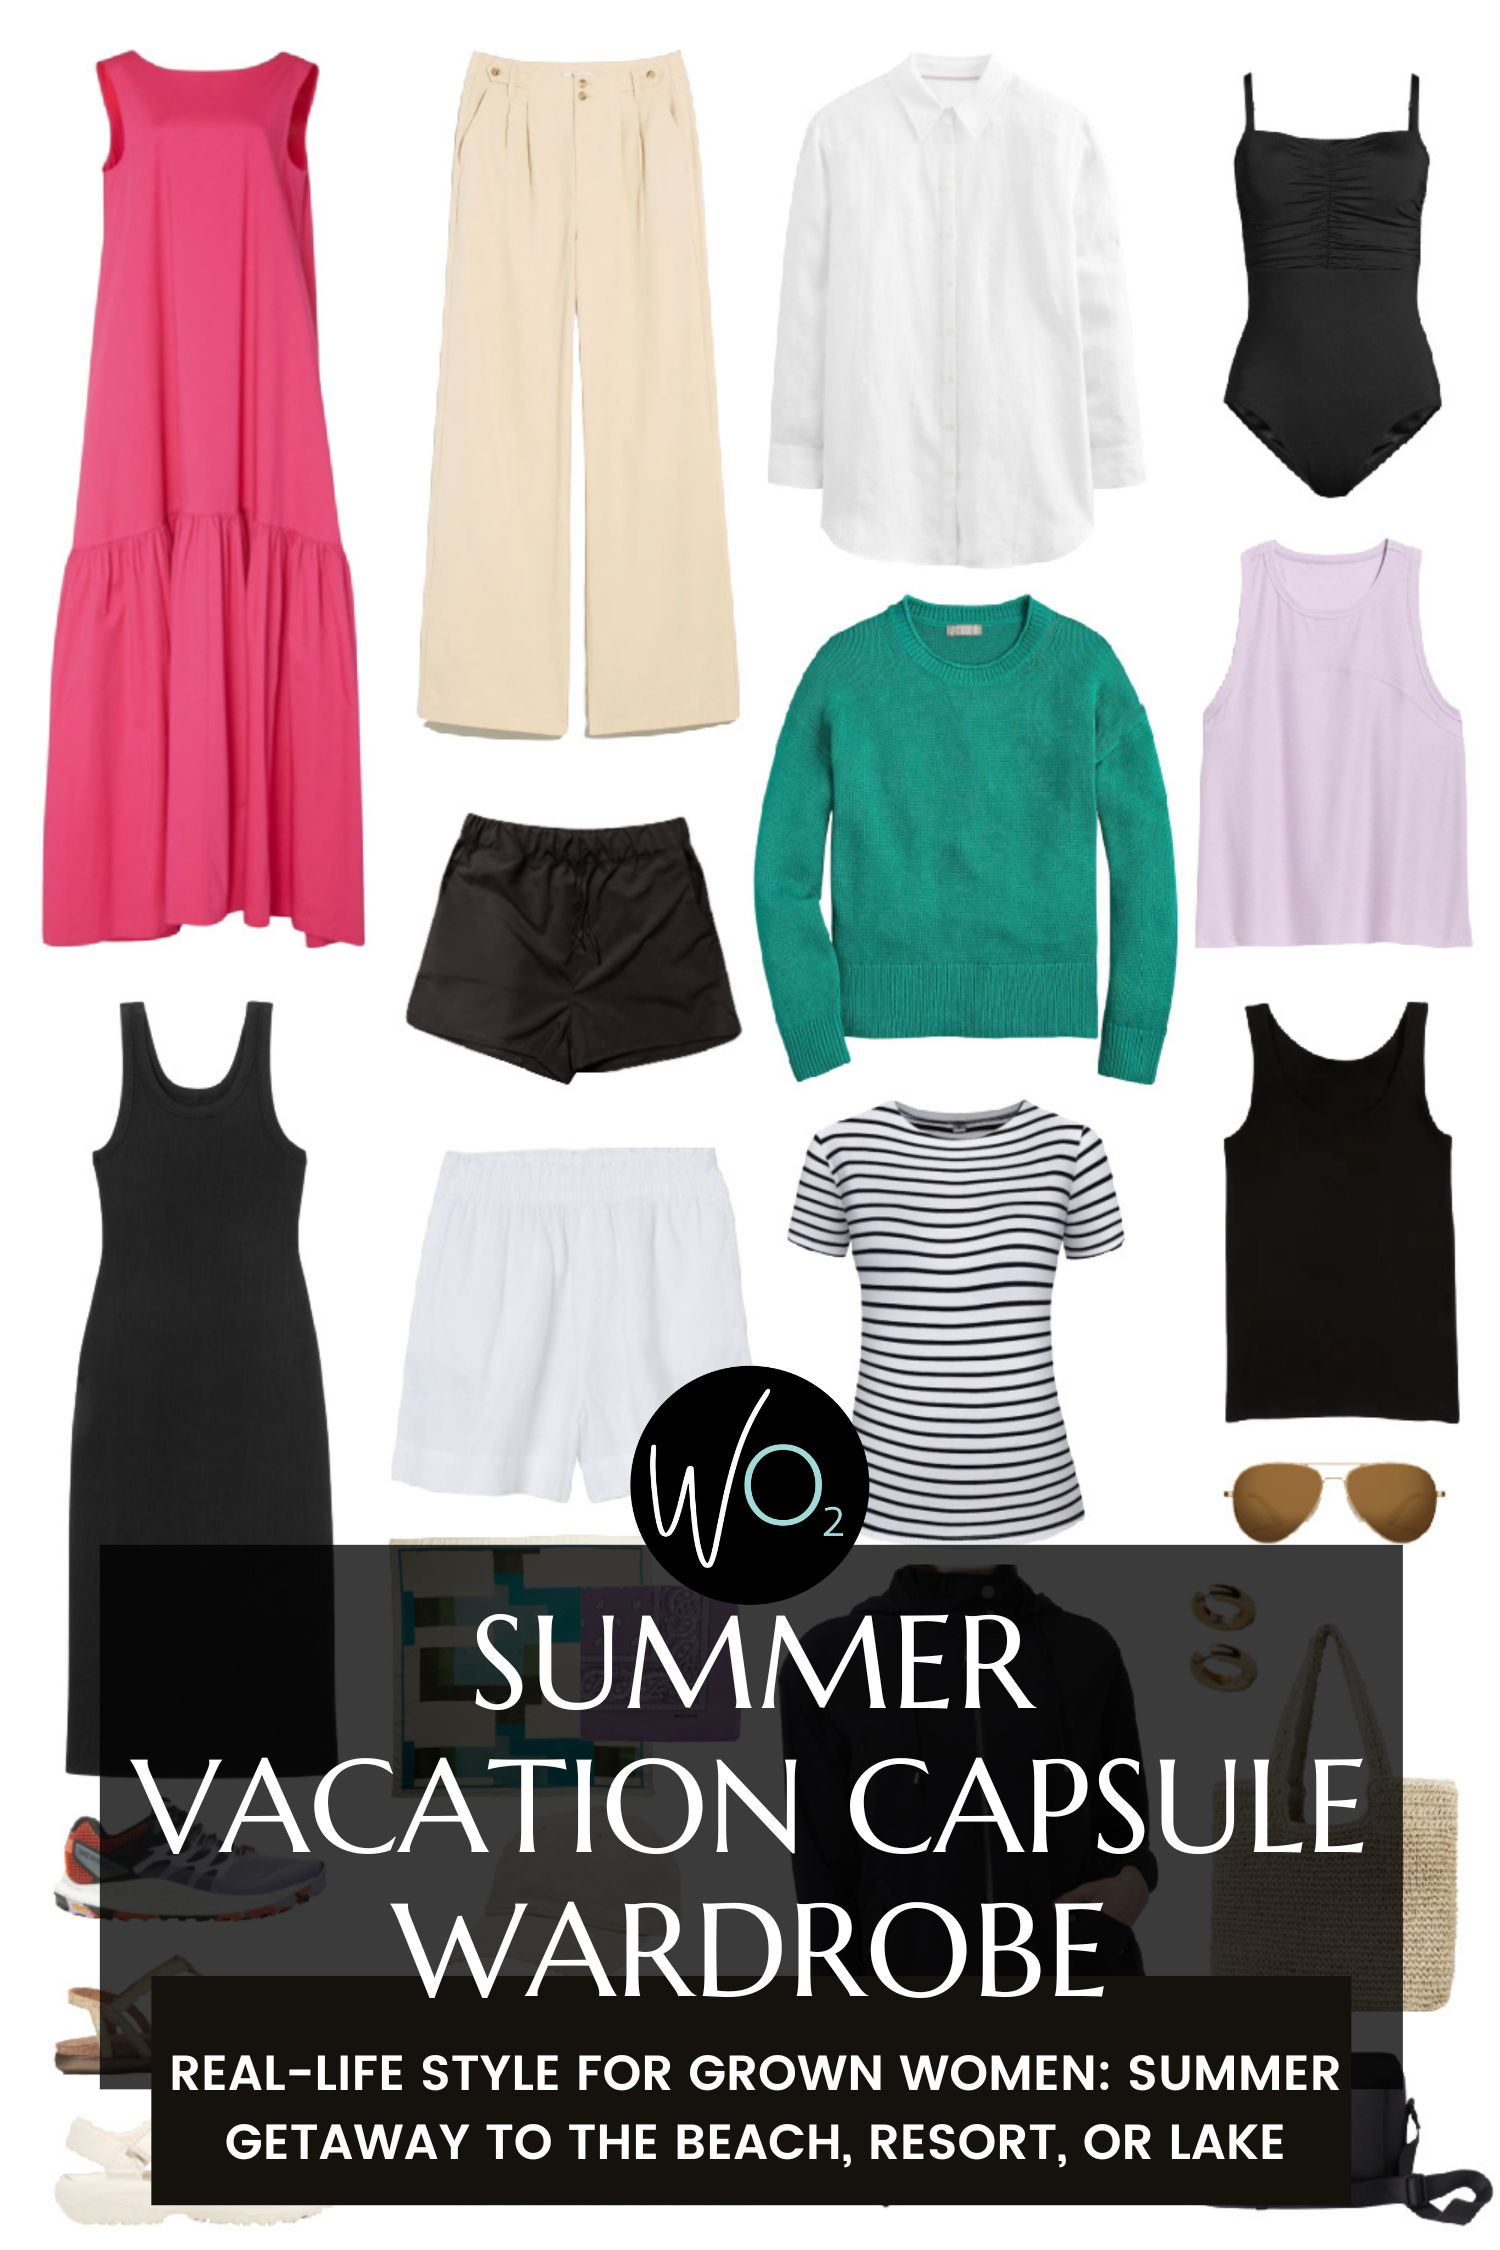 Guide to Mix & Match Outfits for Versatile Travel Wardrobe